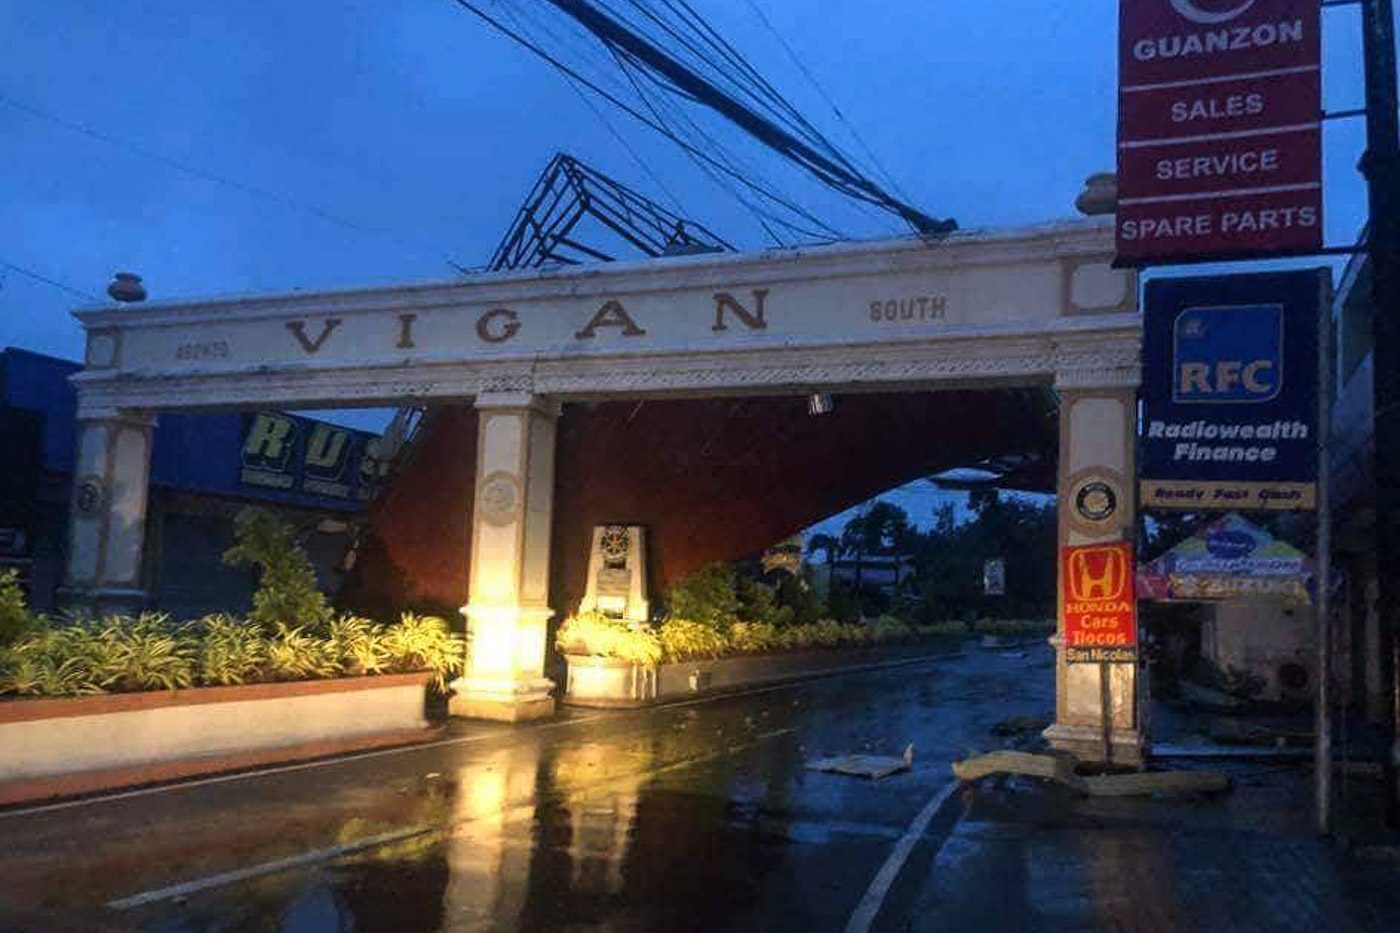 DOWN. A billboard collapses in Vigan, Ilocos Sur, due to Ompong's ferocious winds. Photo by Ilocos Sur PDRRMC 